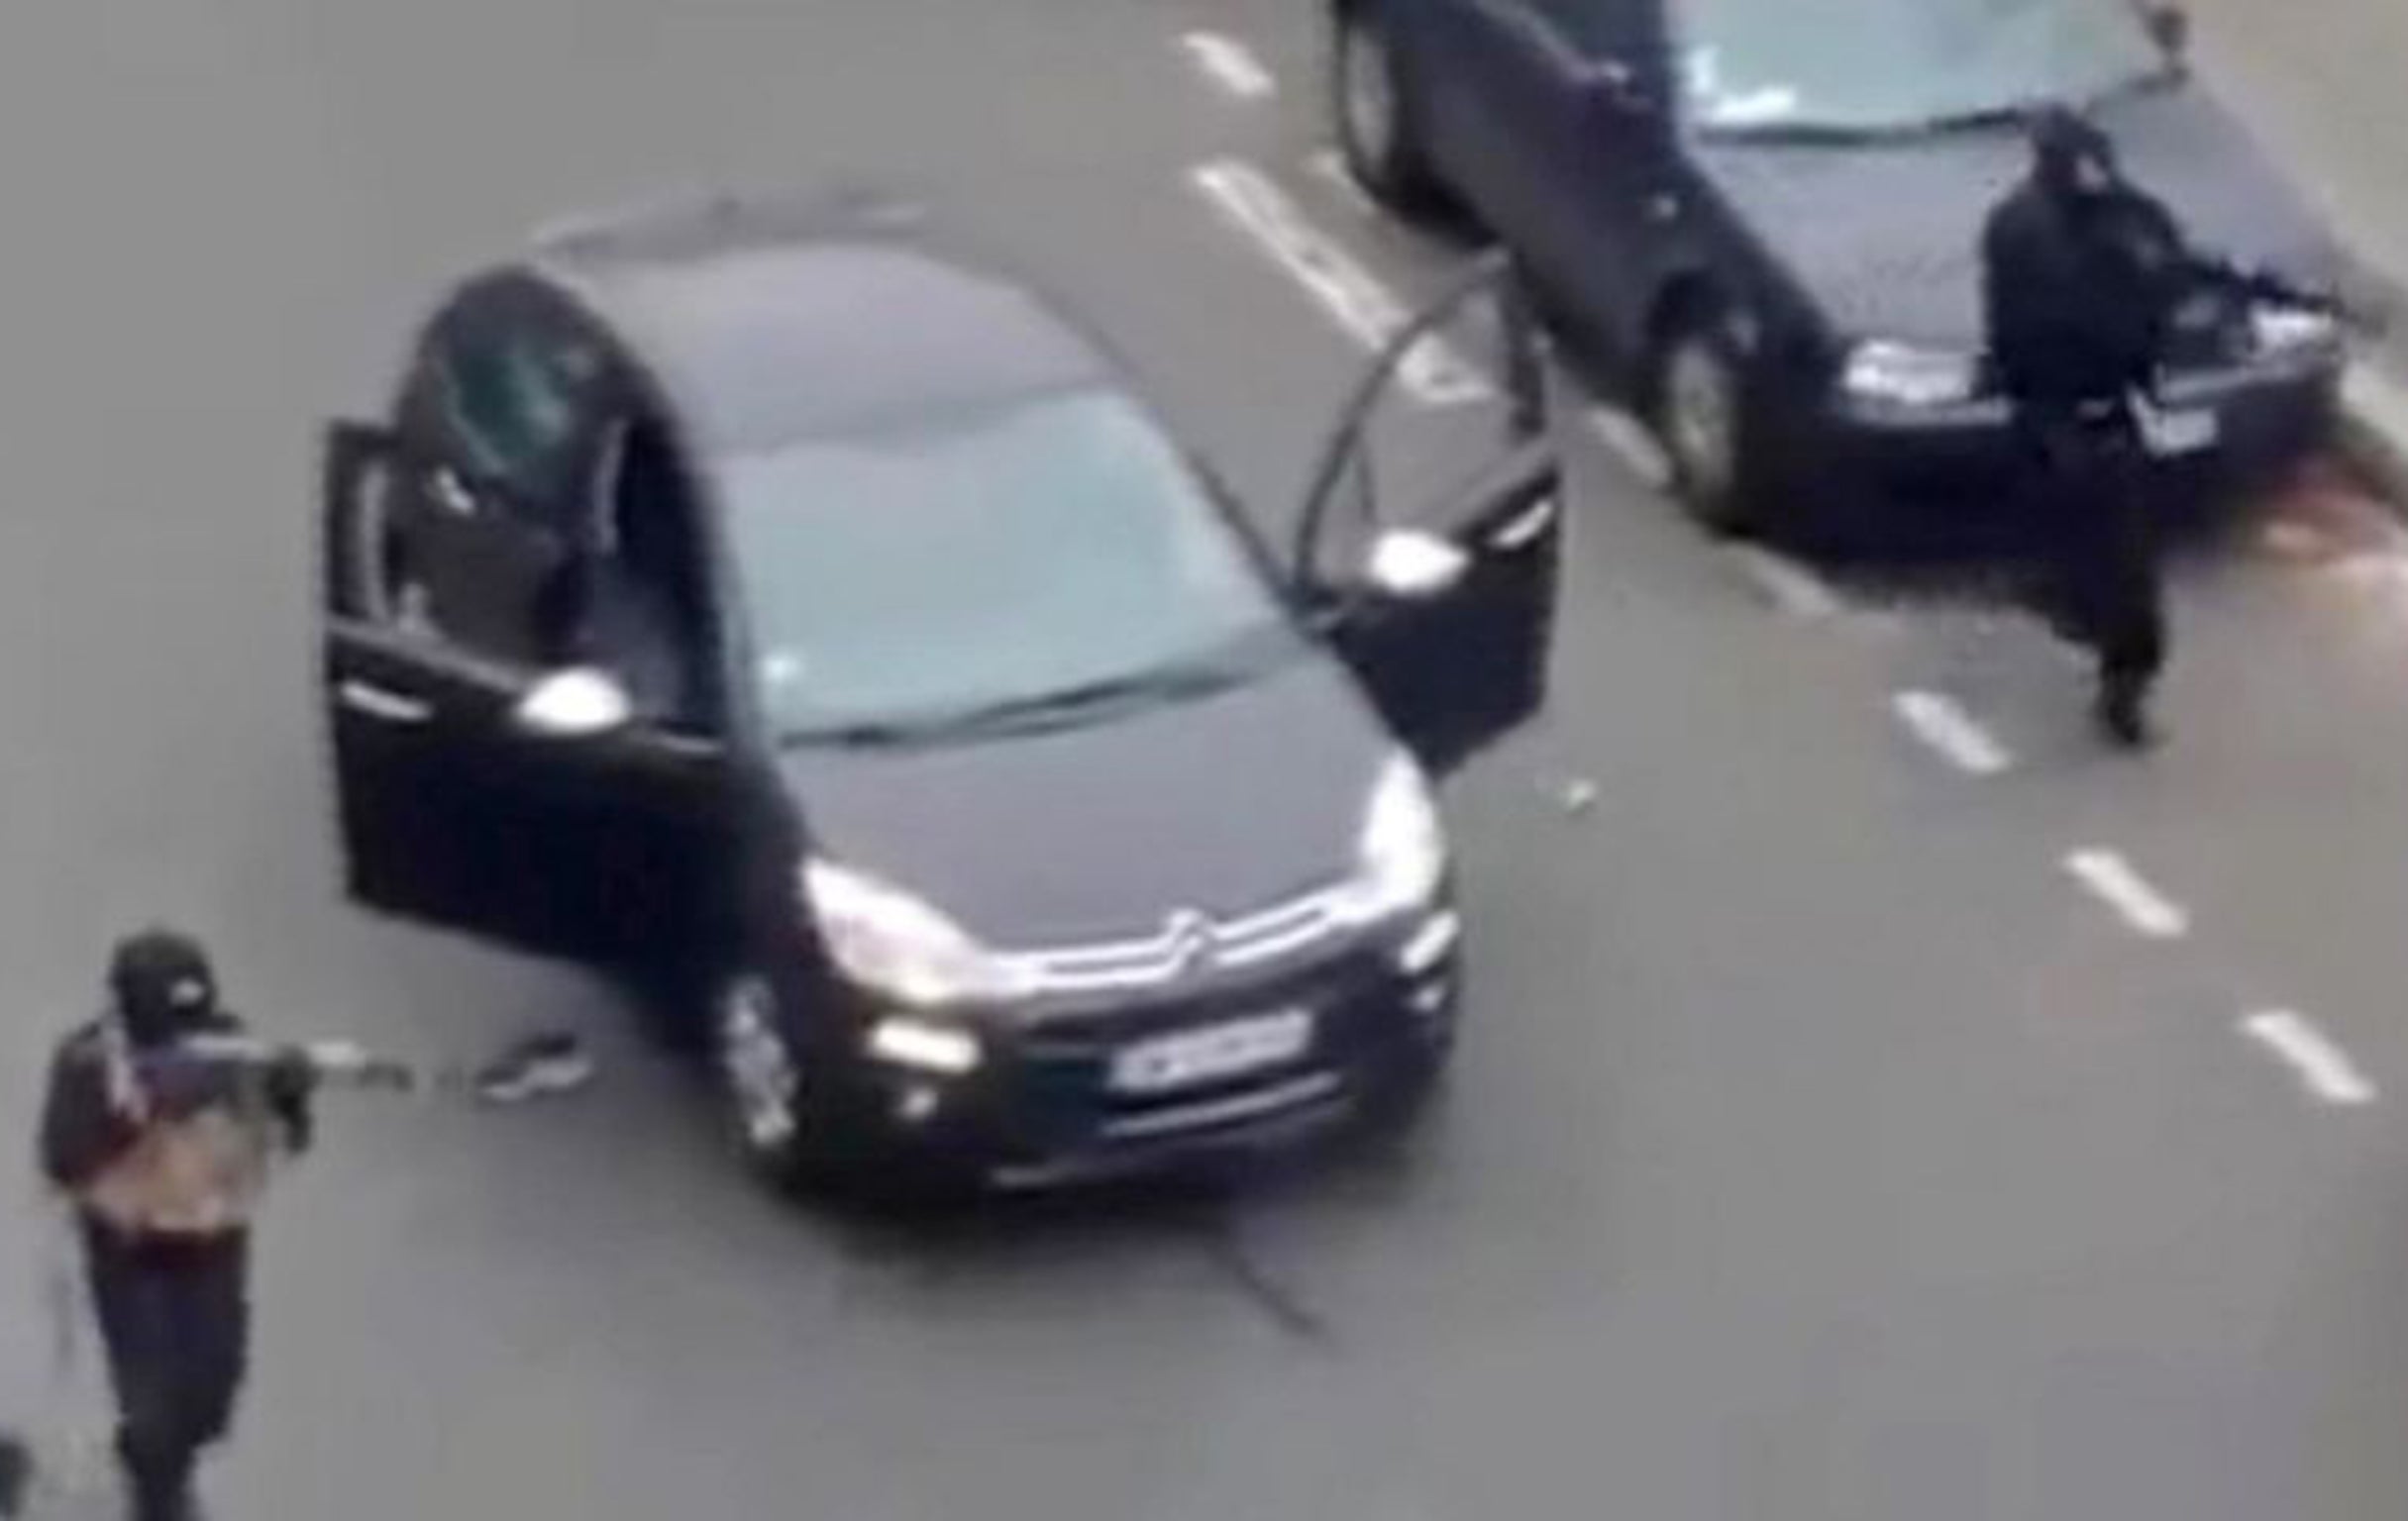 The two brothers stormed the Charlie Hebdo headquarters, opening fire on staff, before executing an already injured police officer as they fled (AP)